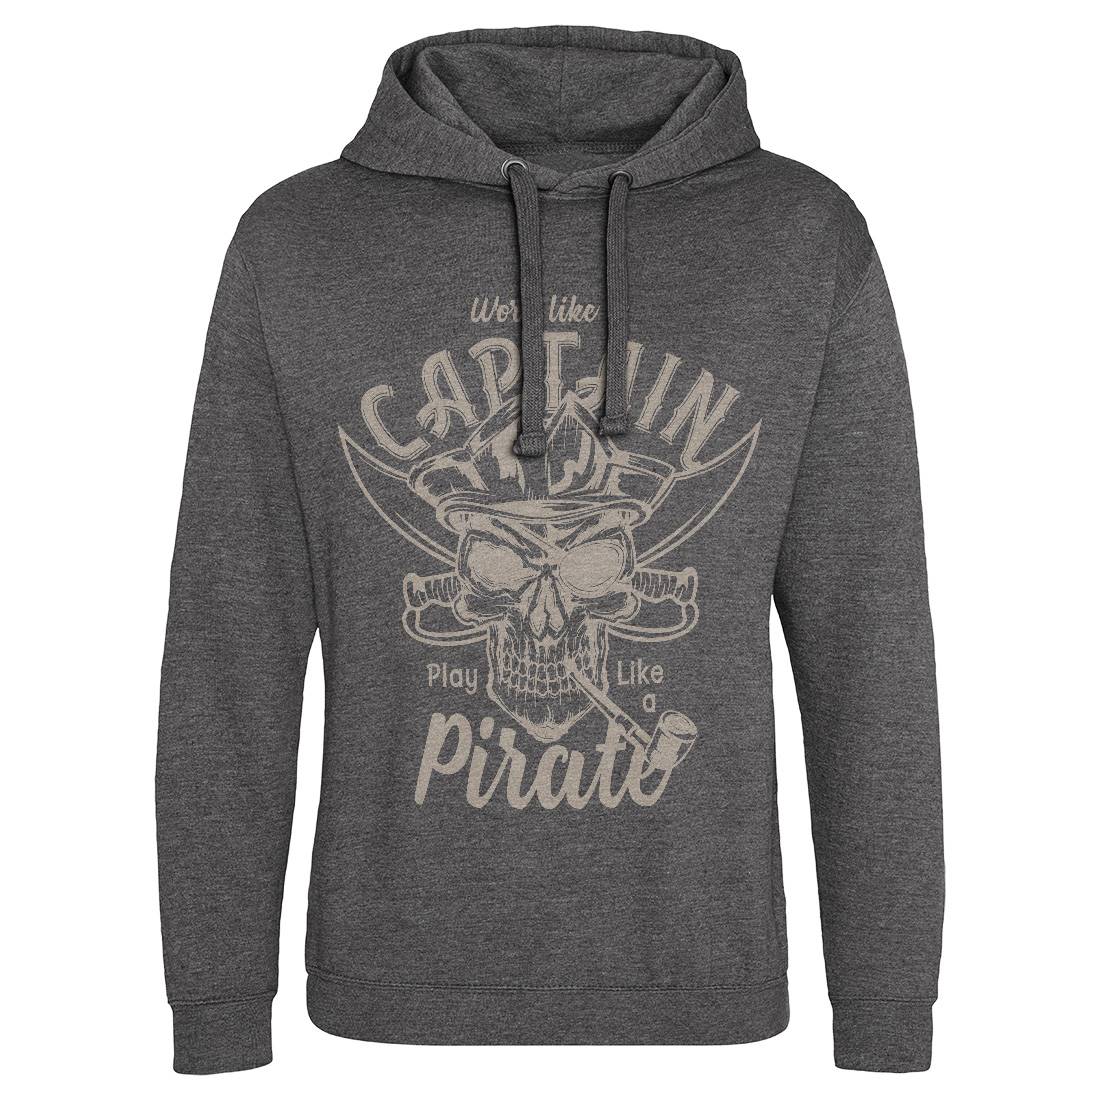 Pirate Mens Hoodie Without Pocket Navy B156